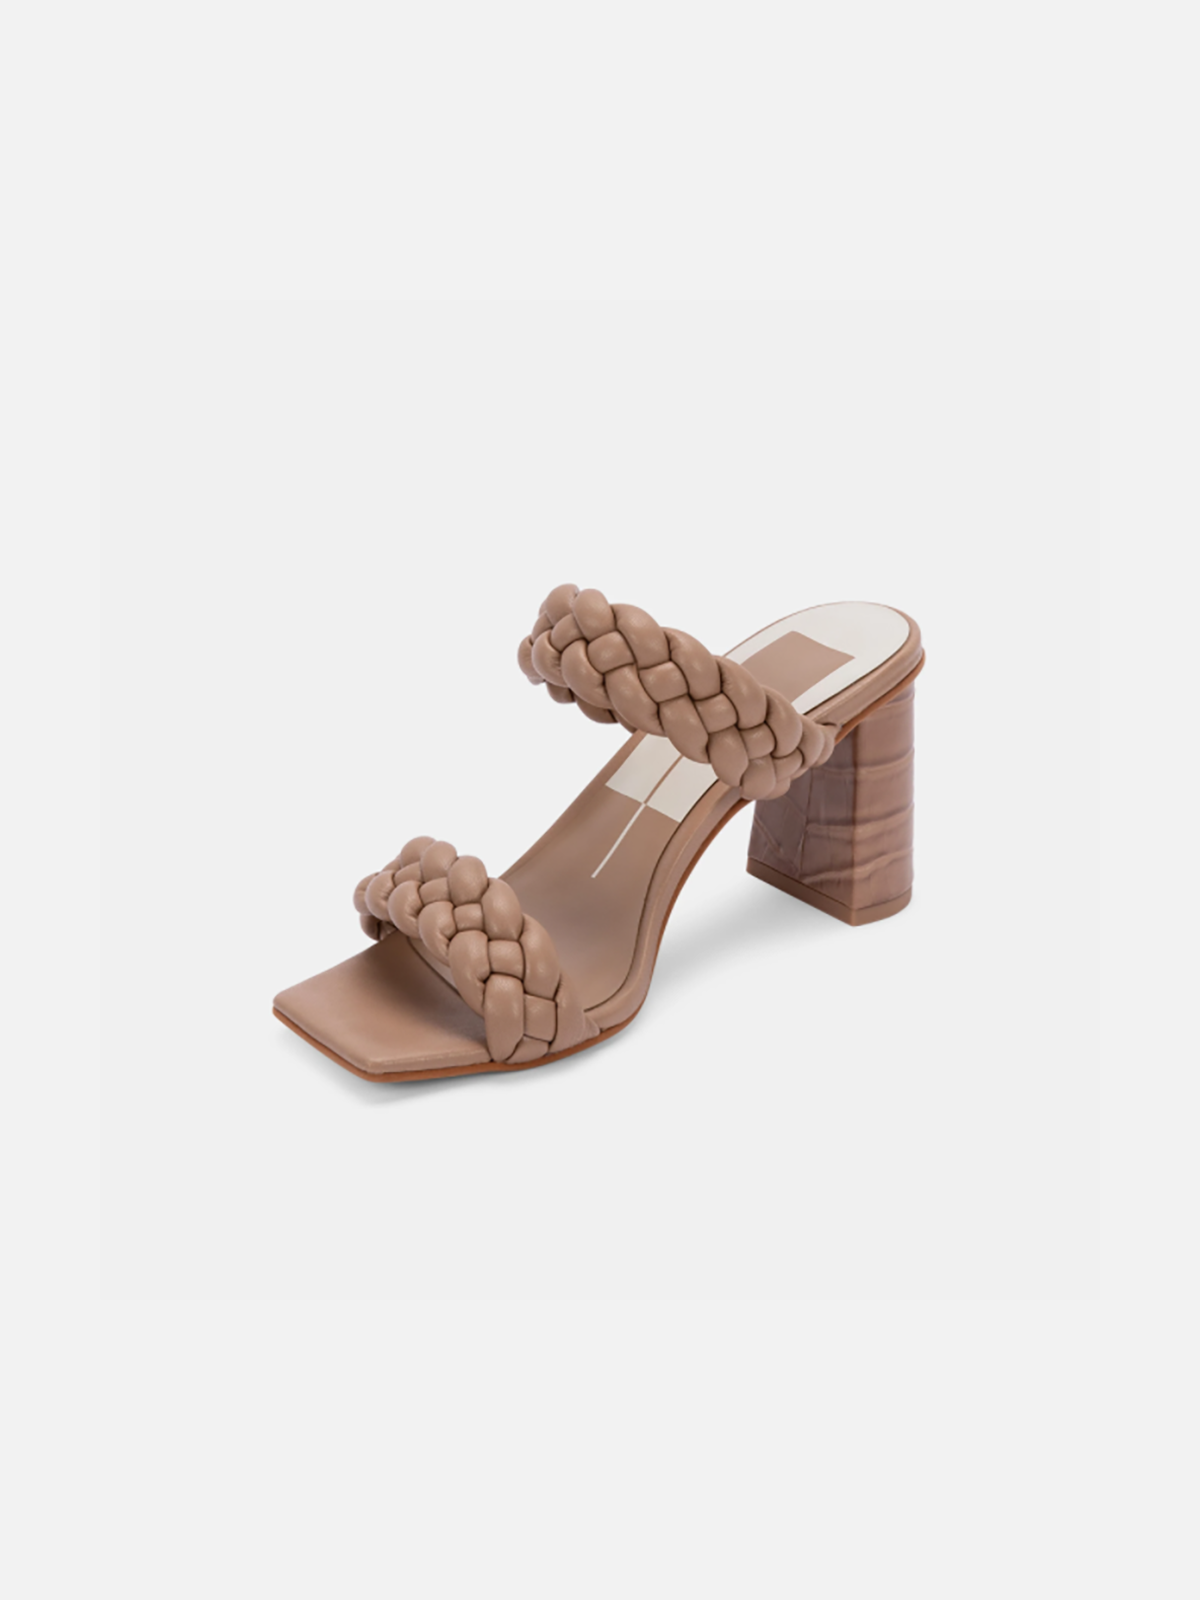 dolce vita paily heel sandals in cafe stella